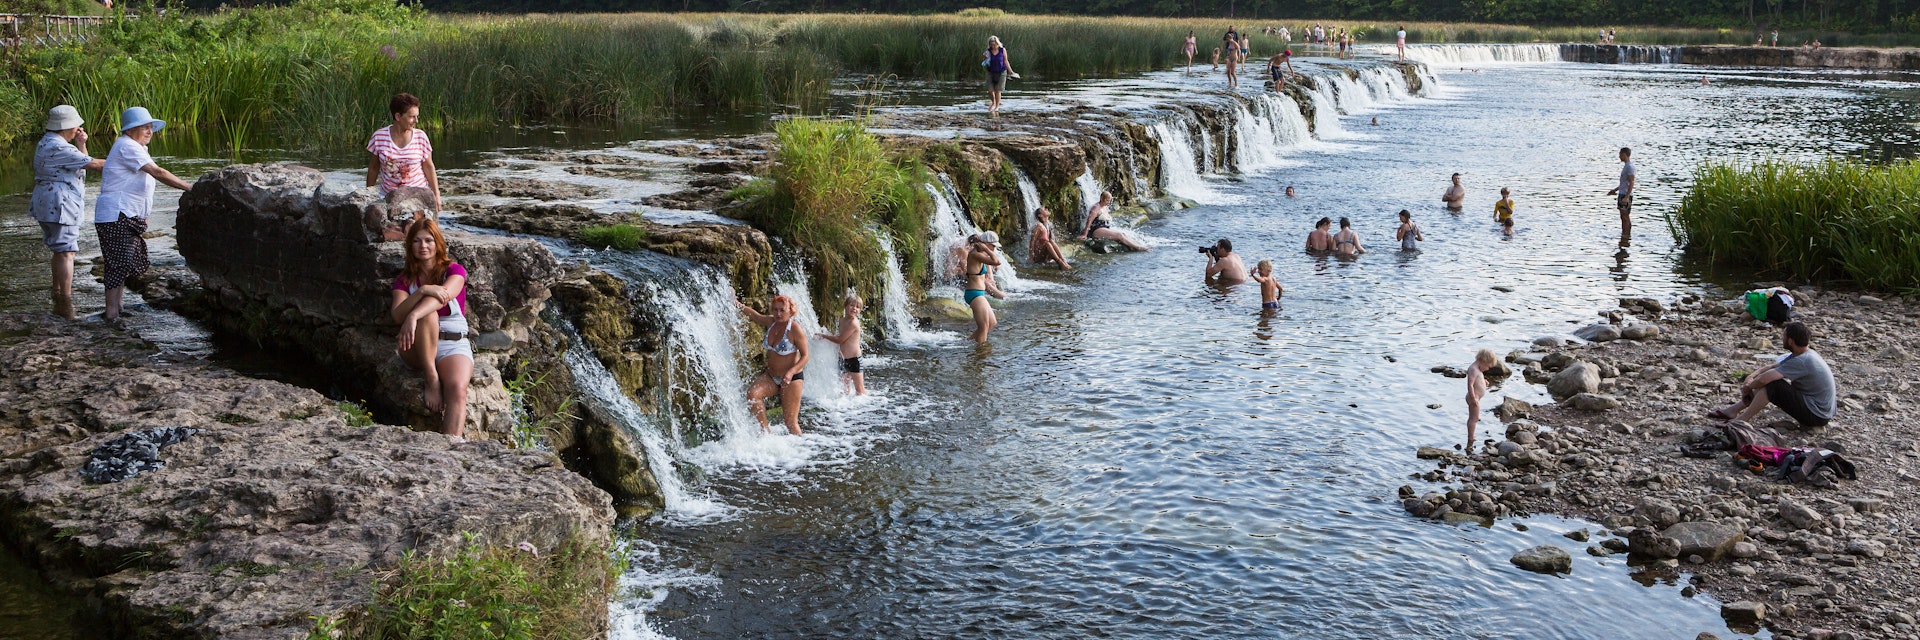 Kuldiga, Latvia - August 10, 2014: People are swimming by the waterfall. It's the longest waterfall in Europe.